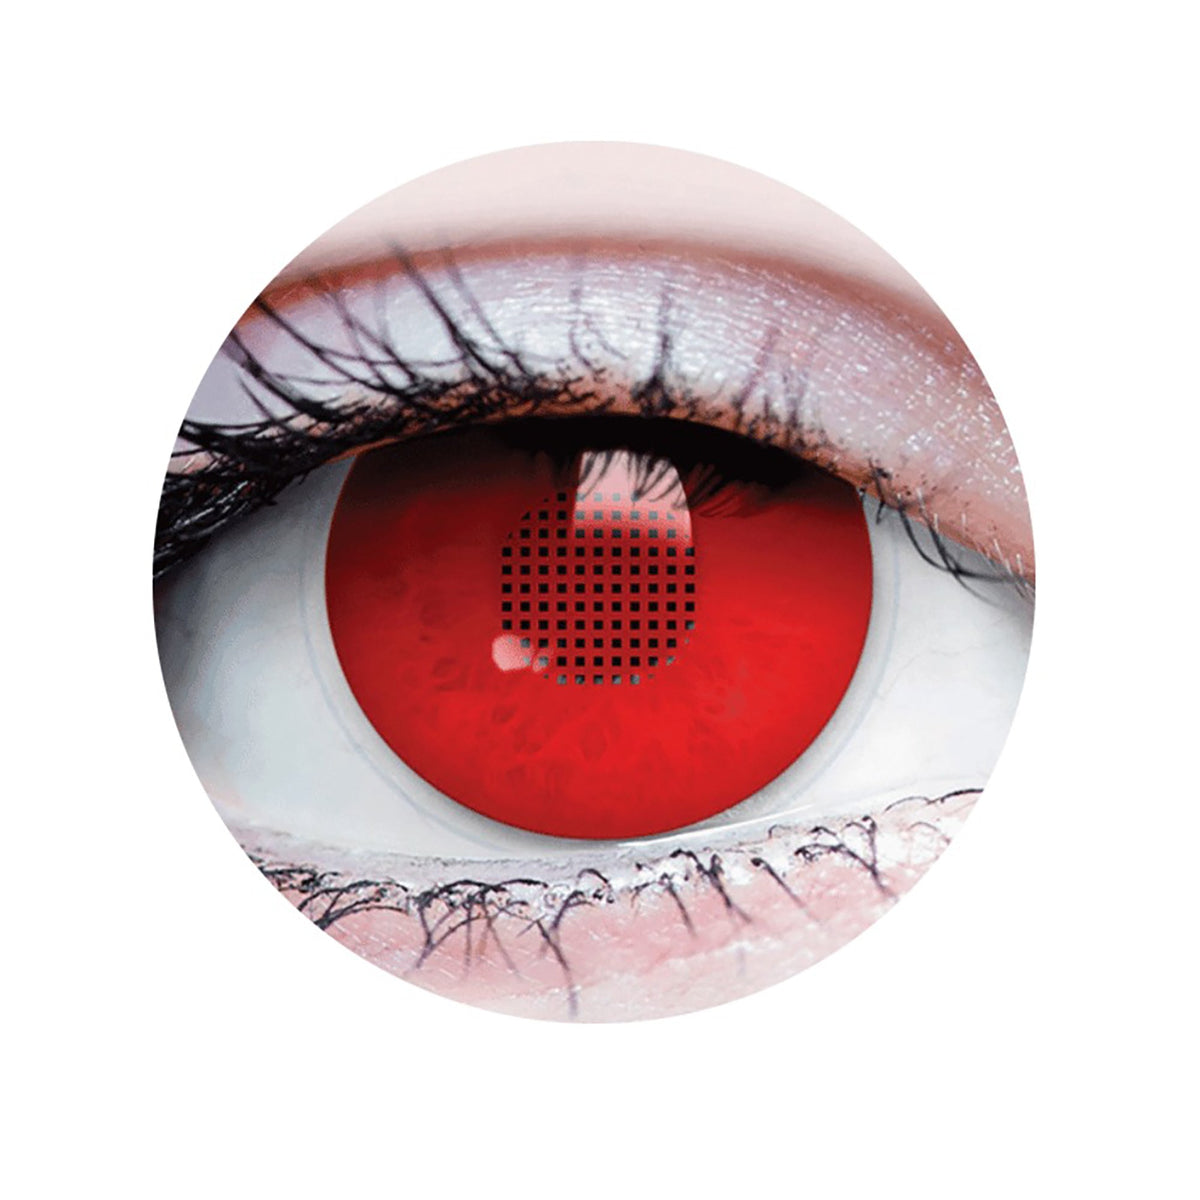 PRIMAL CONTACT LENSES Costume Accessories Red X-Ray Contact Lenses, 3 Month Usage 628153229422